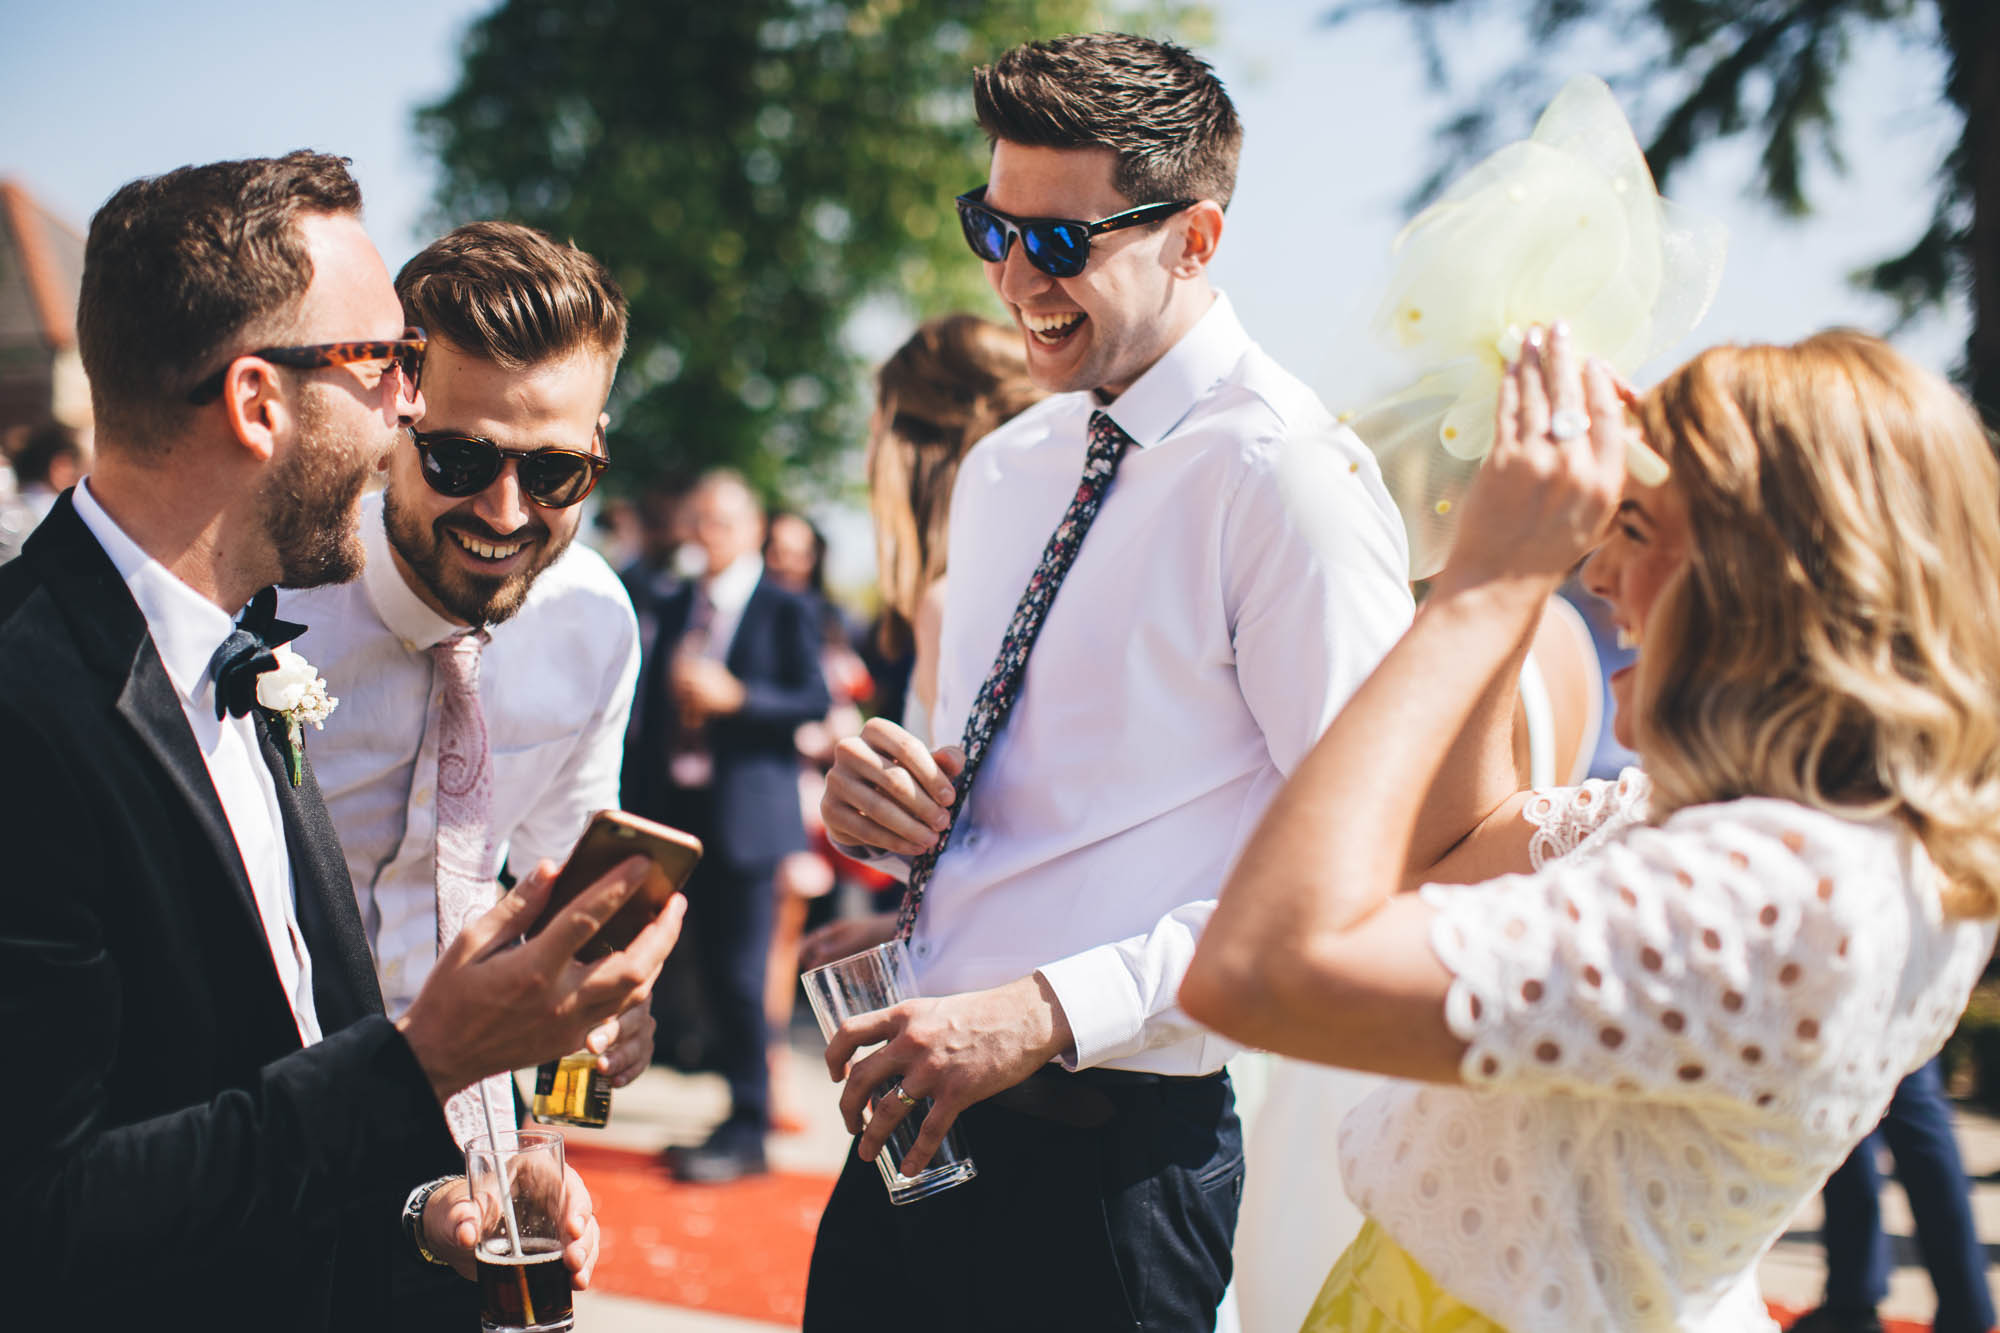 Groom shows wedding guests something funny on his phone that everyone laughs at